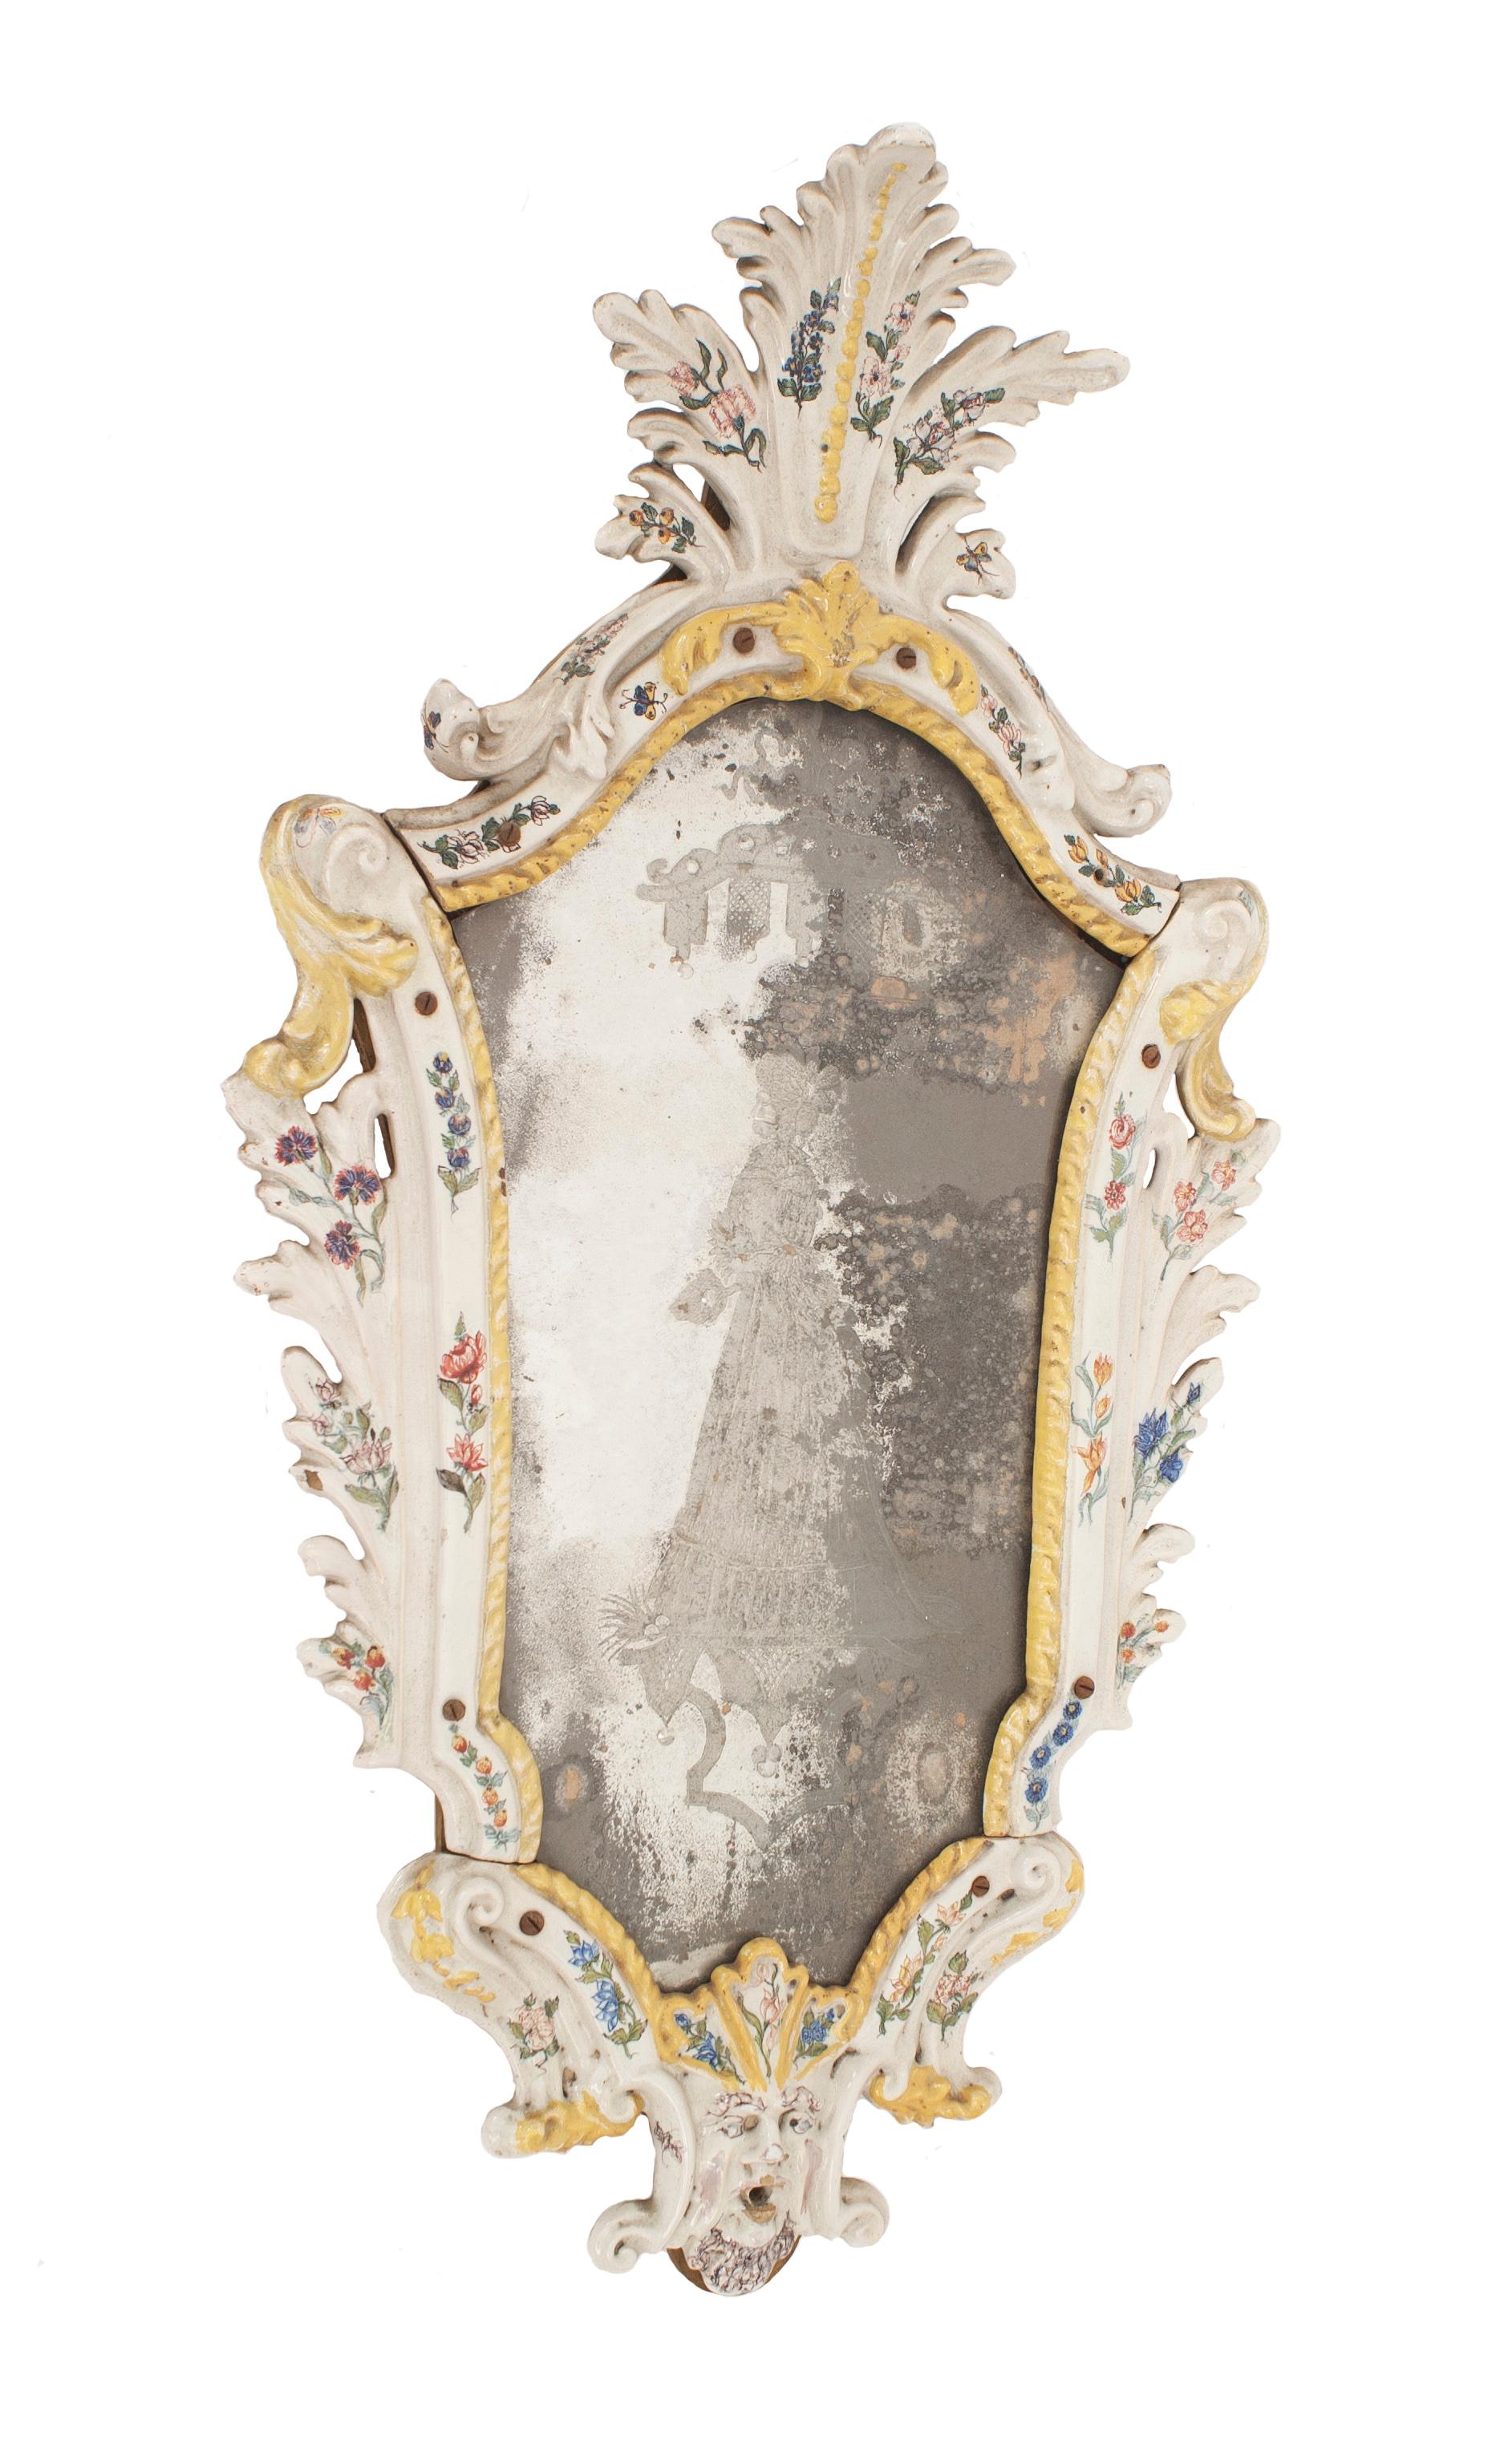 Neoclassical Continental '19th Century' Porcelain Keystone Shaped Wall Mirror For Sale